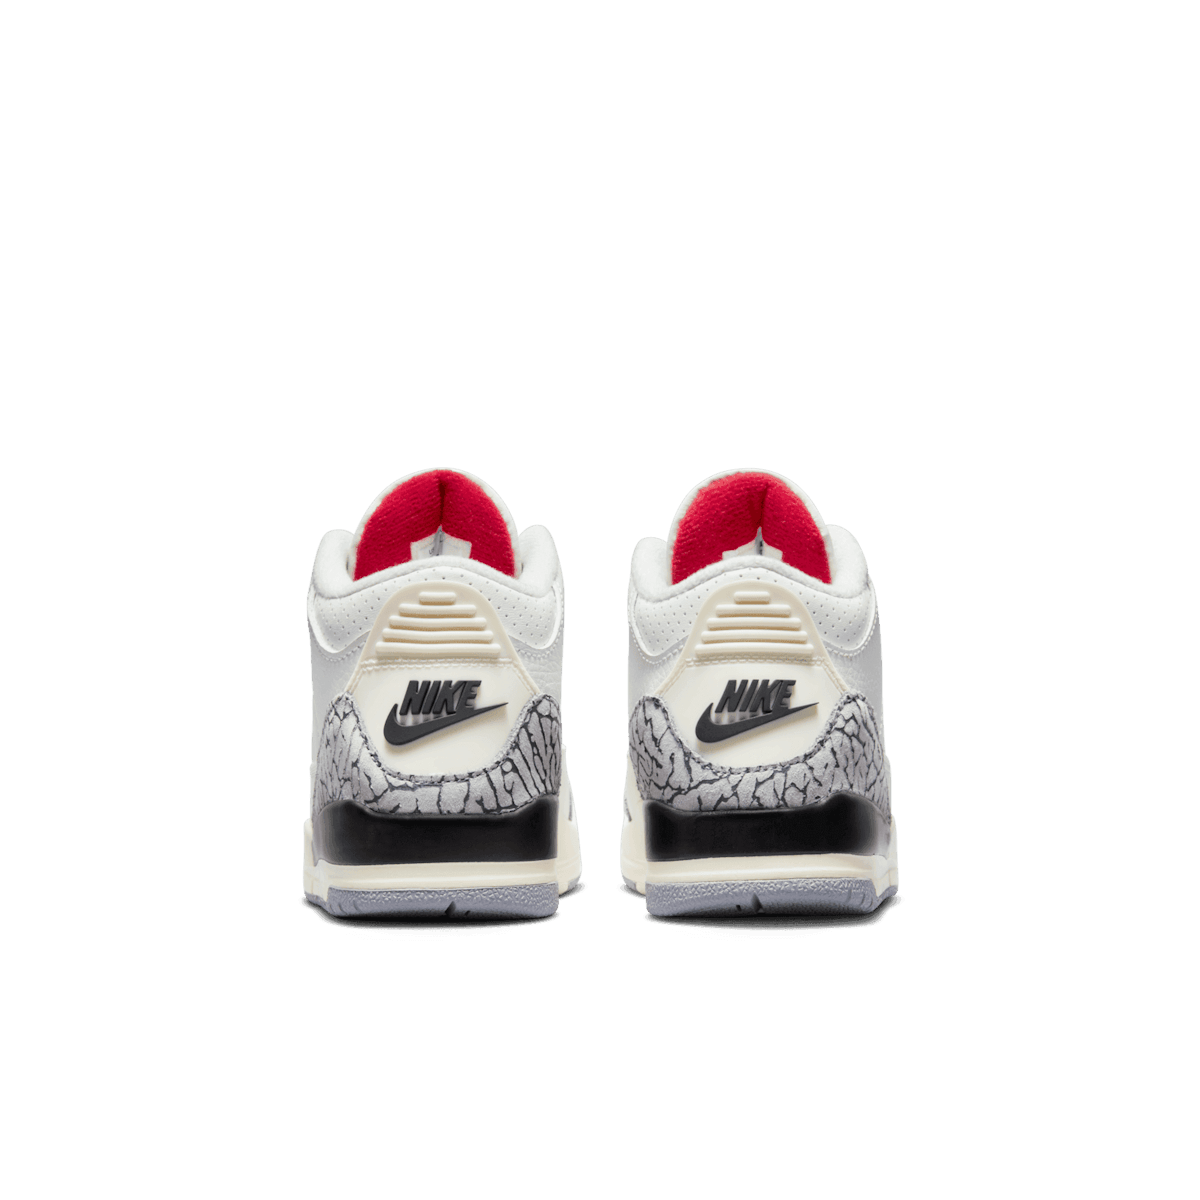 Air Jordan 3 Reimagined White Cement (PS) Angle 3